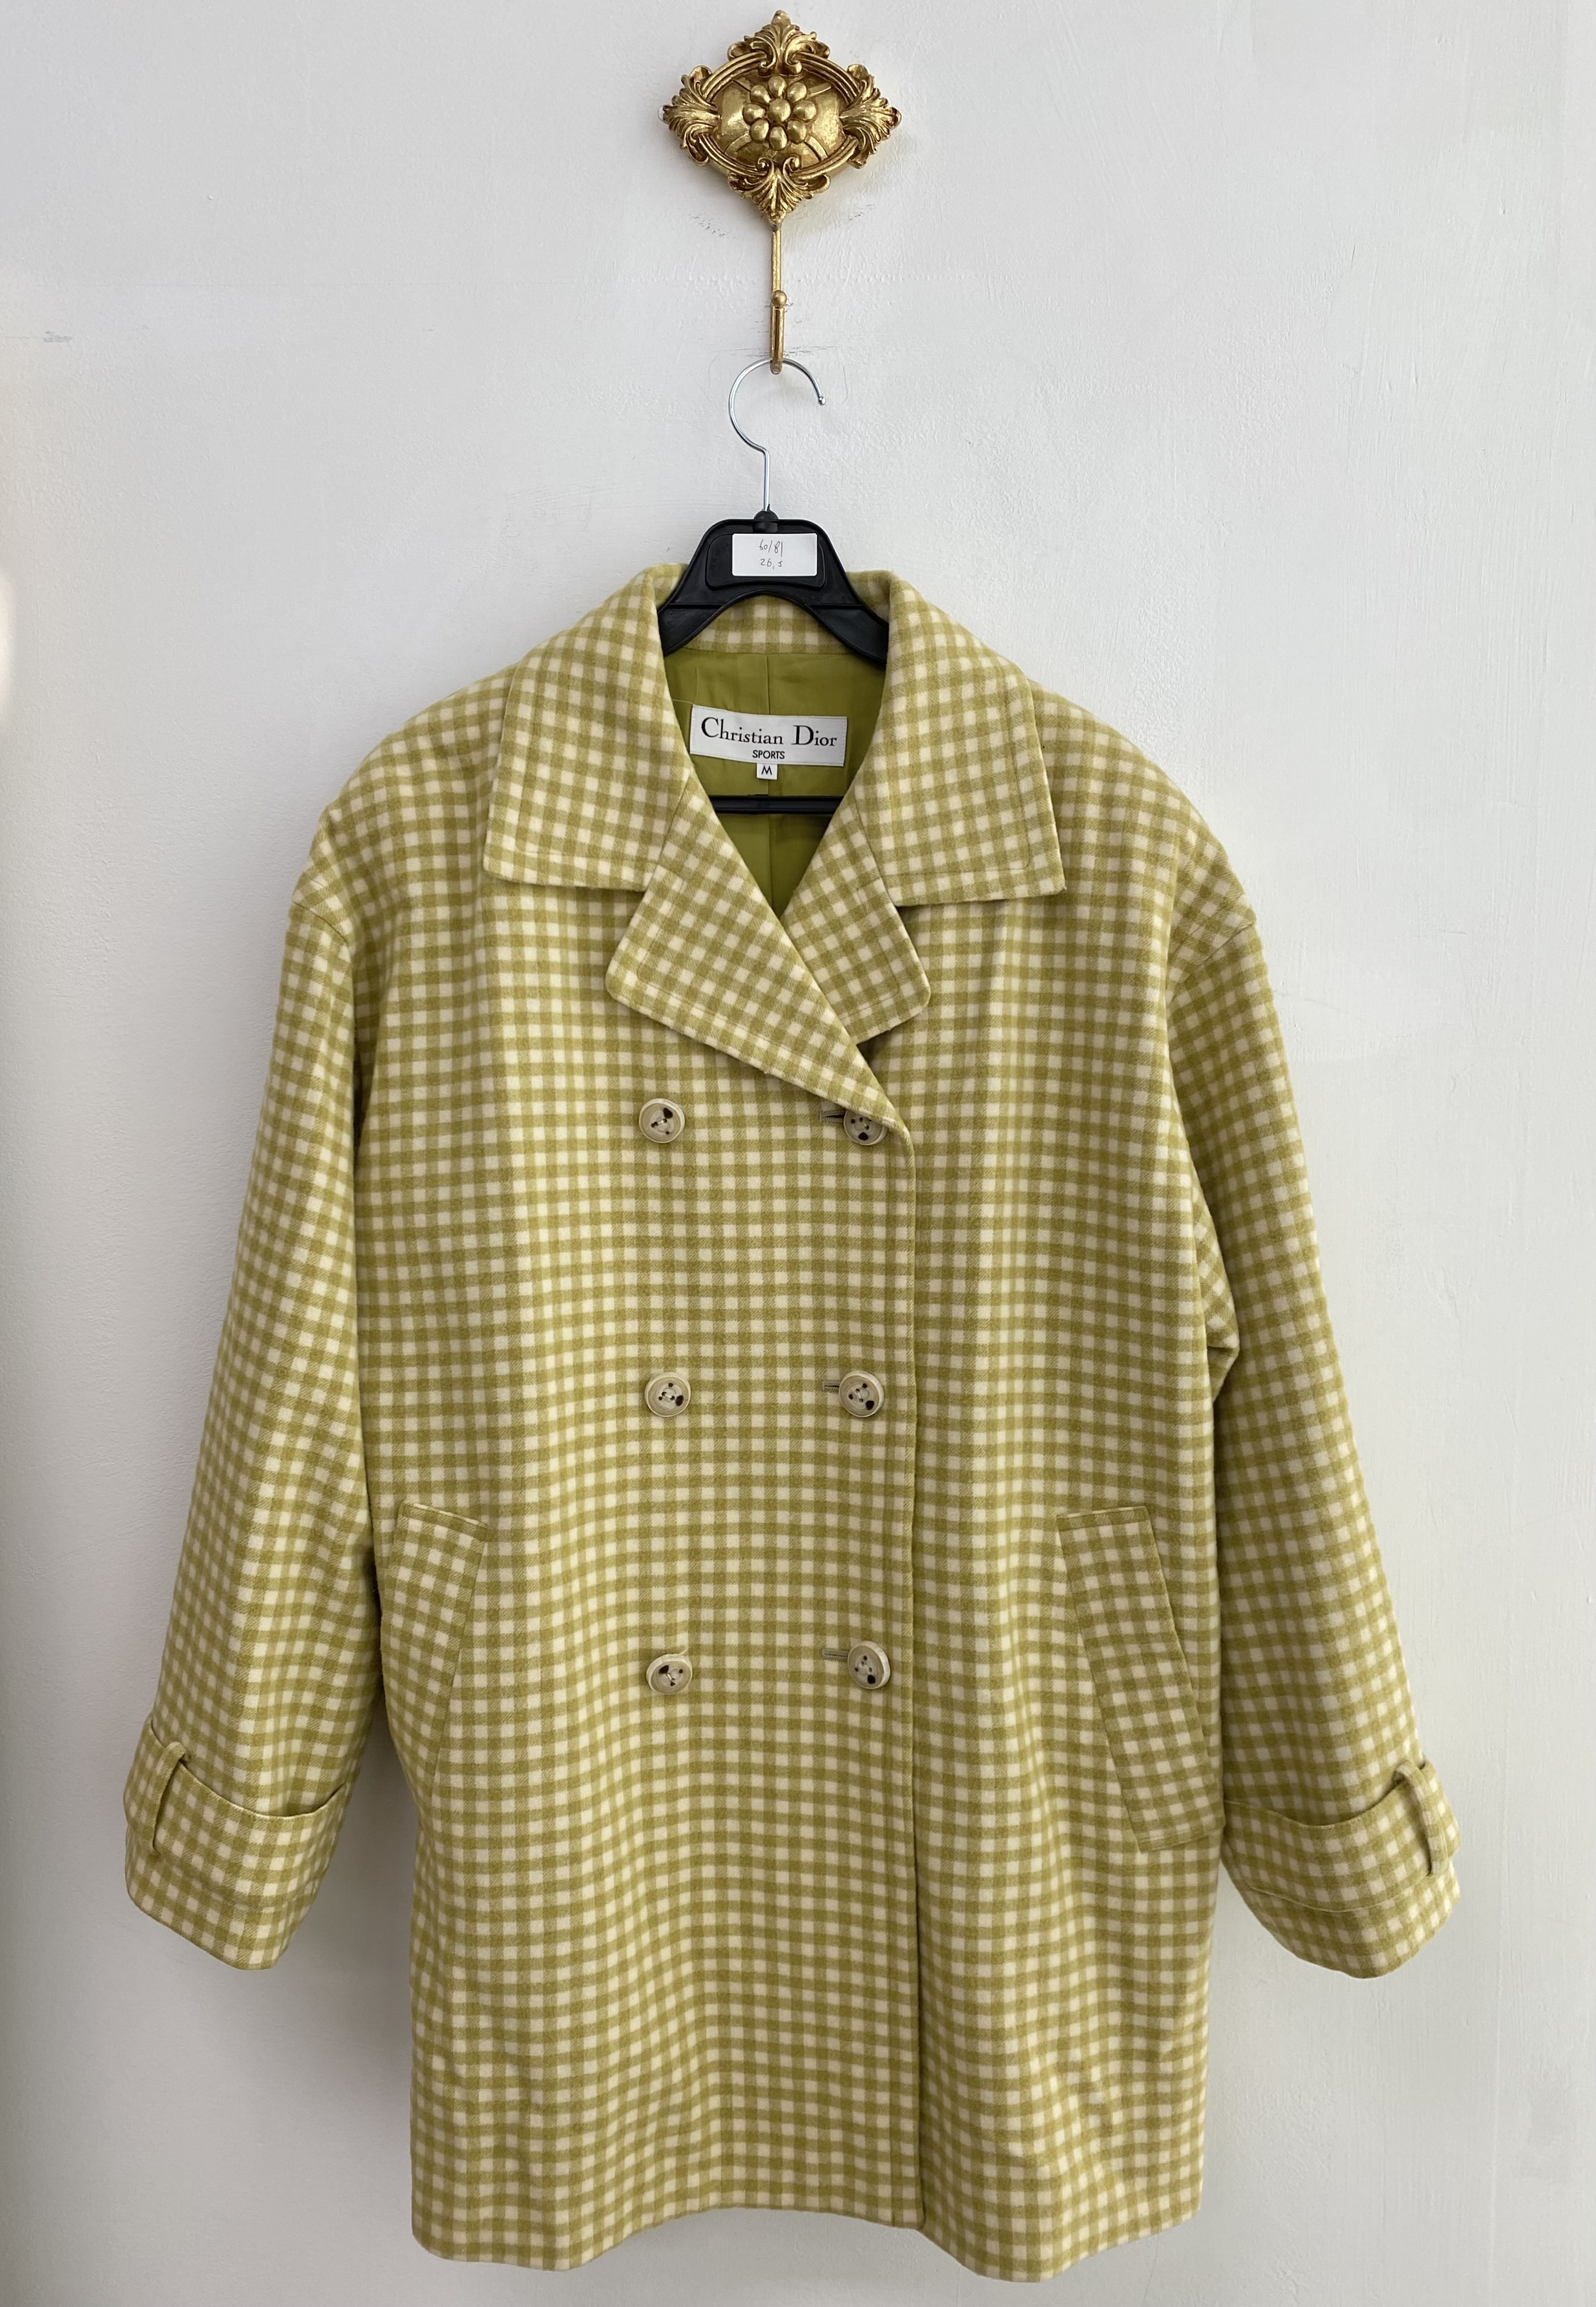 Christian Dior yellow green gingham check wool double coat